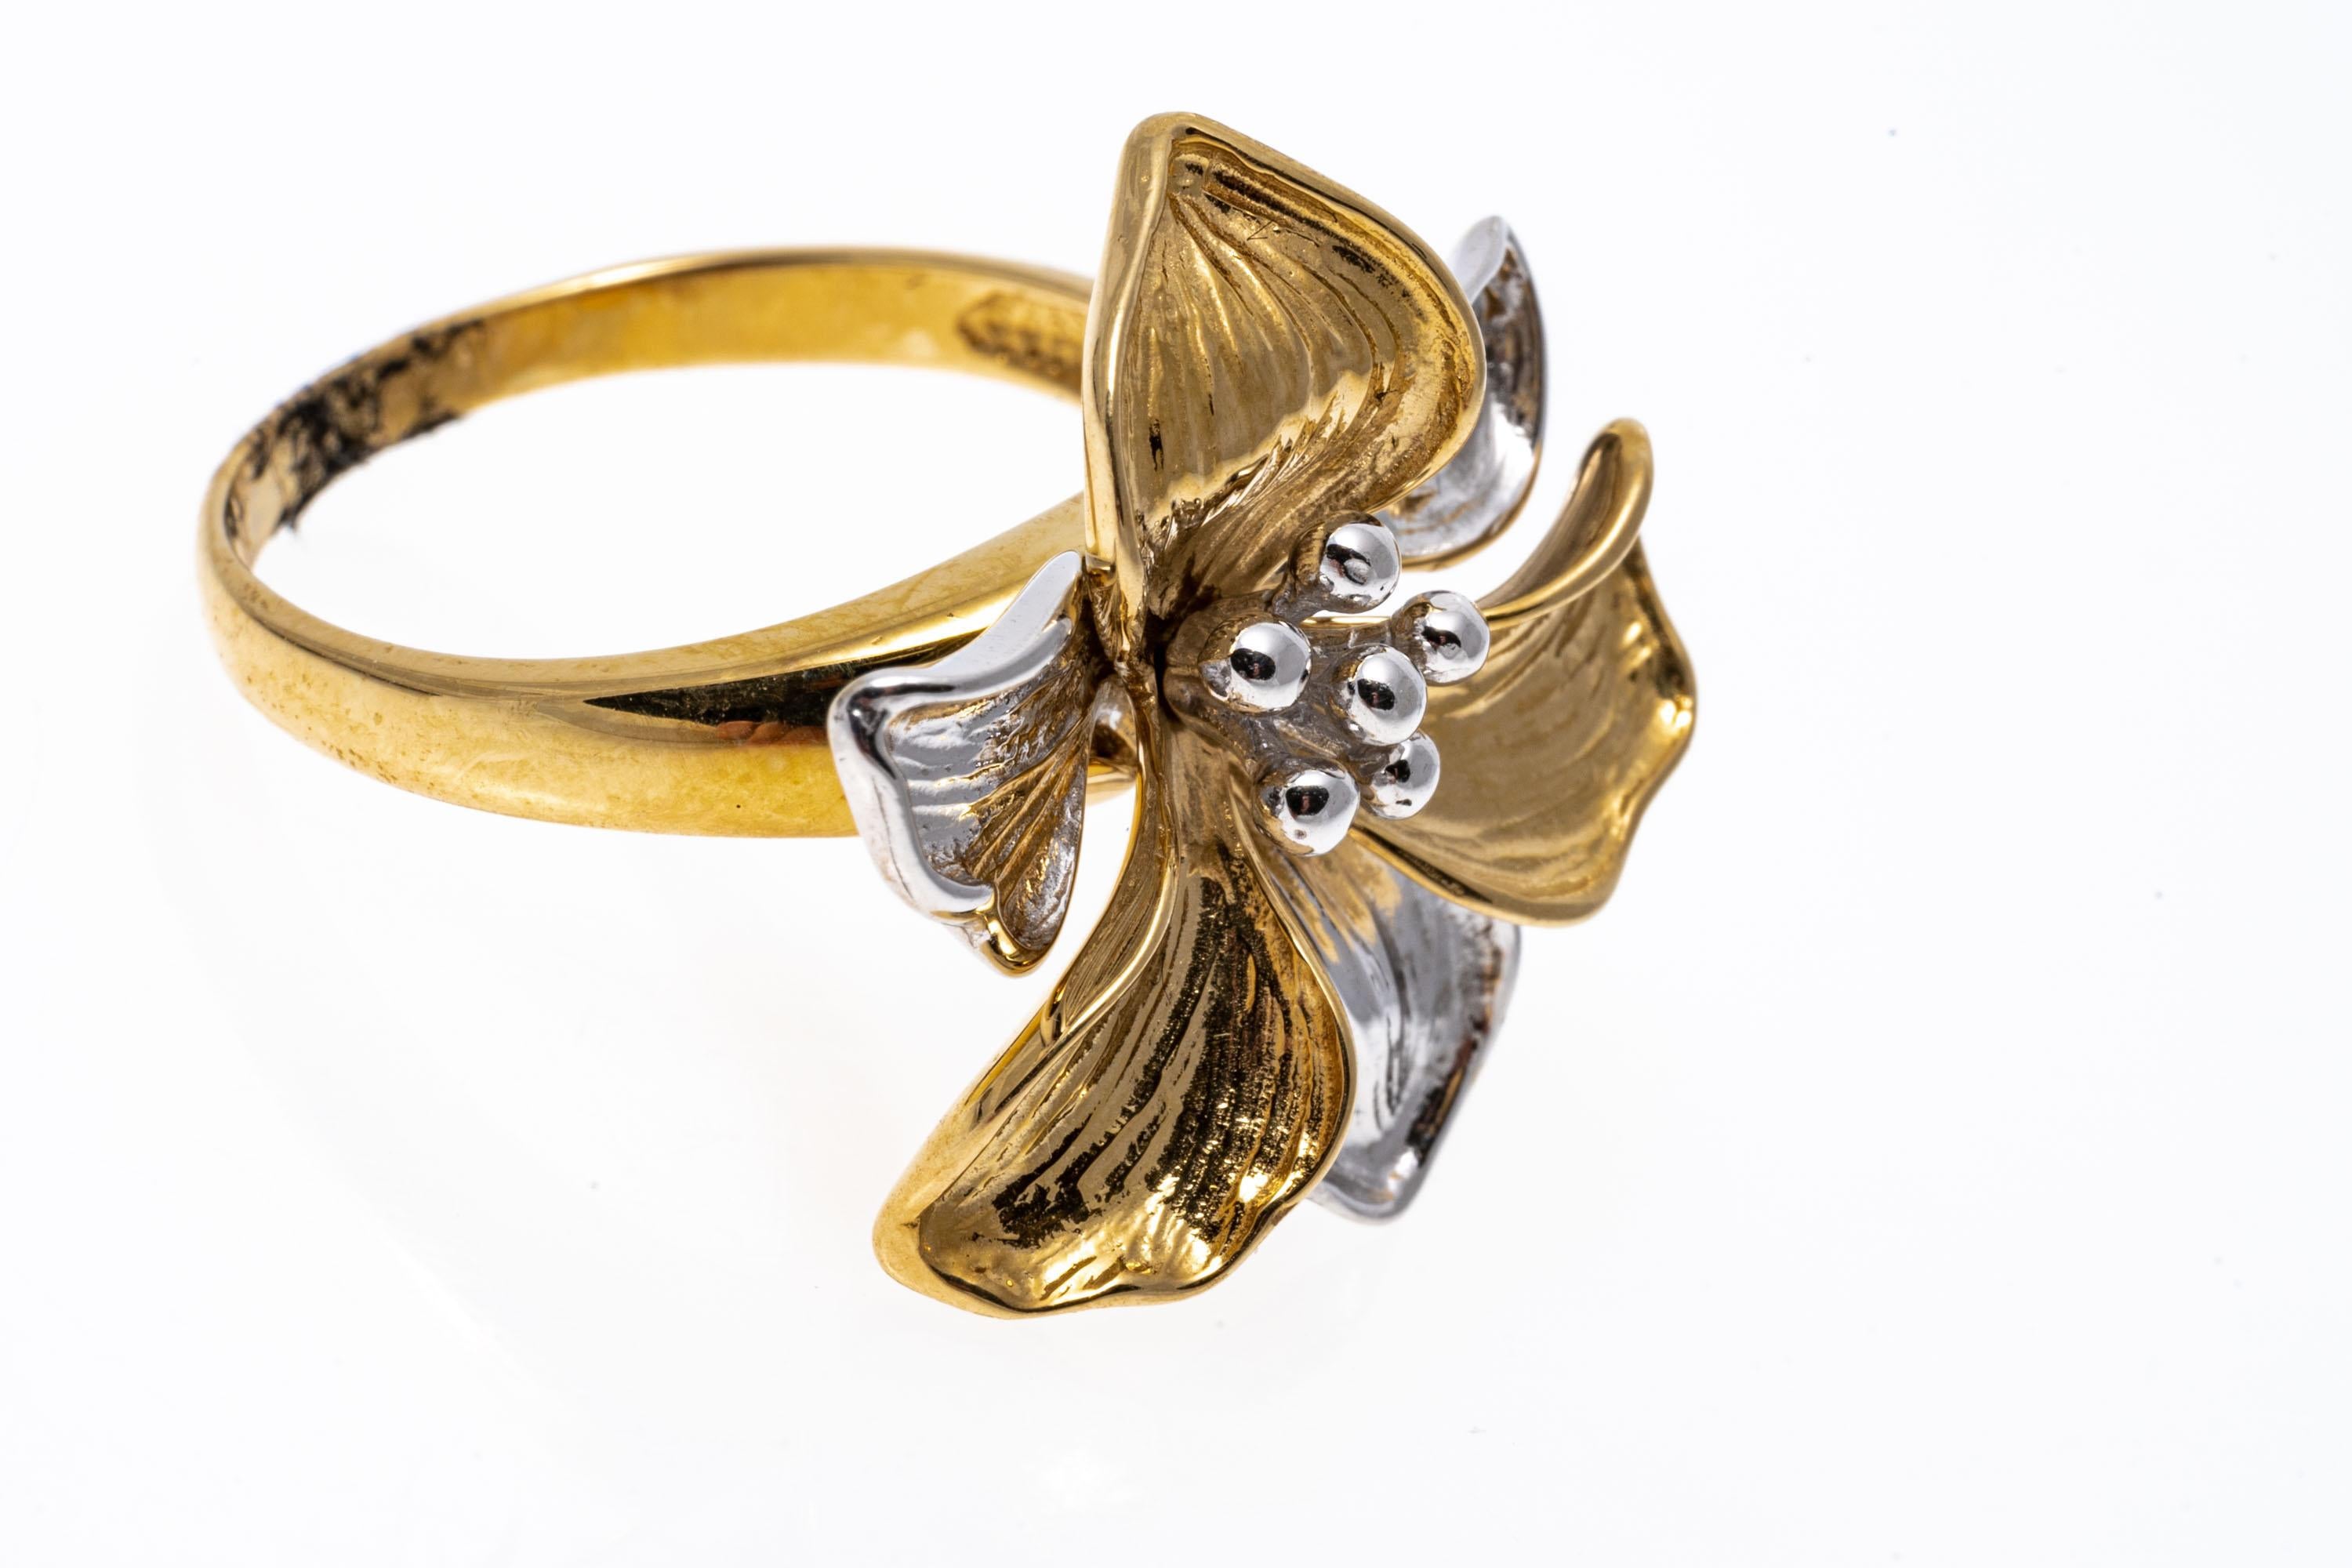 14k gold ring. This beautiful ring is a high polished finished, two tone figural flower motif ring, decorated with a beaded stamen center and finished with a high polished, yellow gold shank.
Marks: 14k
Dimensions: 13/16